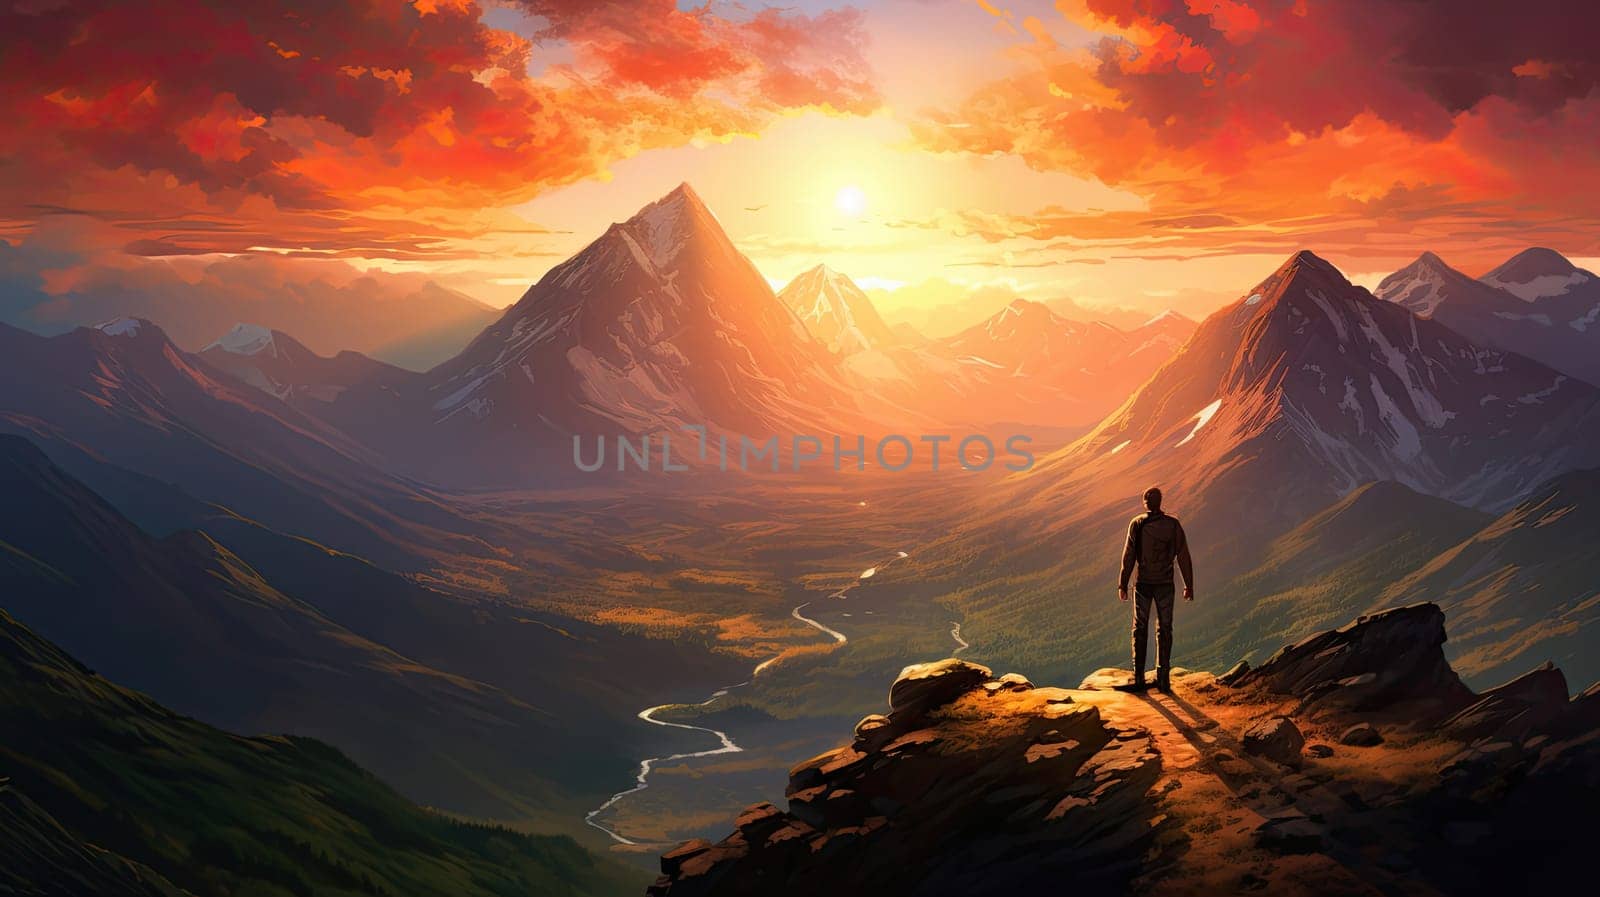 The emotional scene of success portrayed as solitary figure standing atop a mountain peak, bathed in the warm glow of the rising sun, the landscape below painted with hues of accomplishment